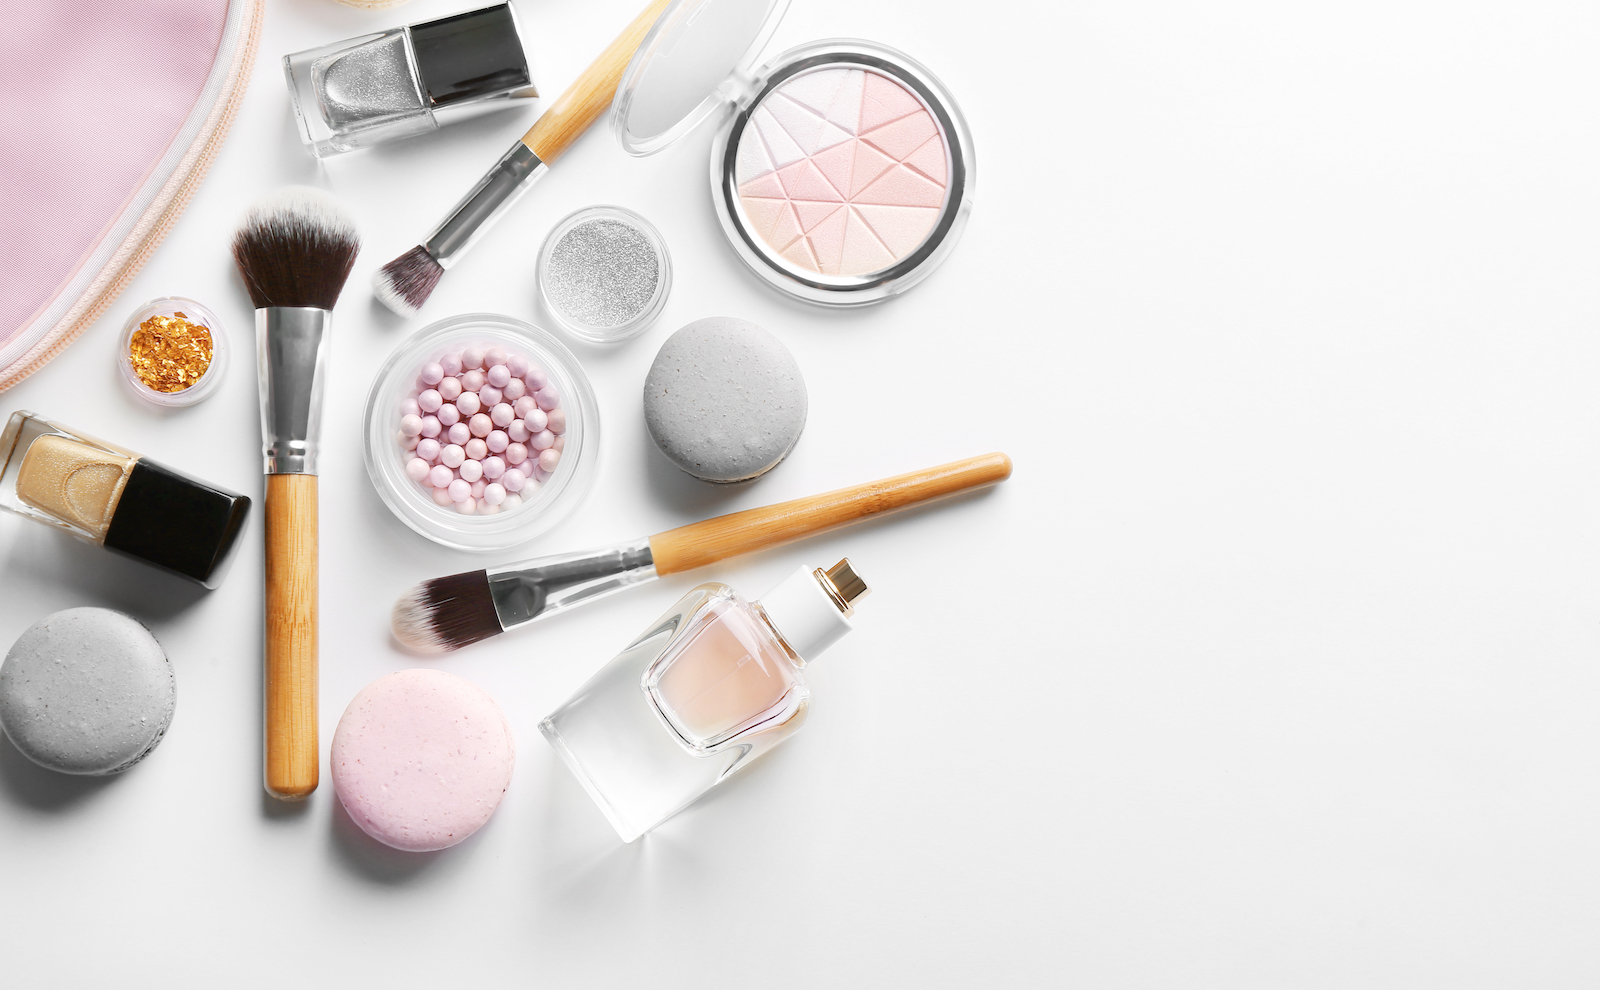 Cosmetics on a counter